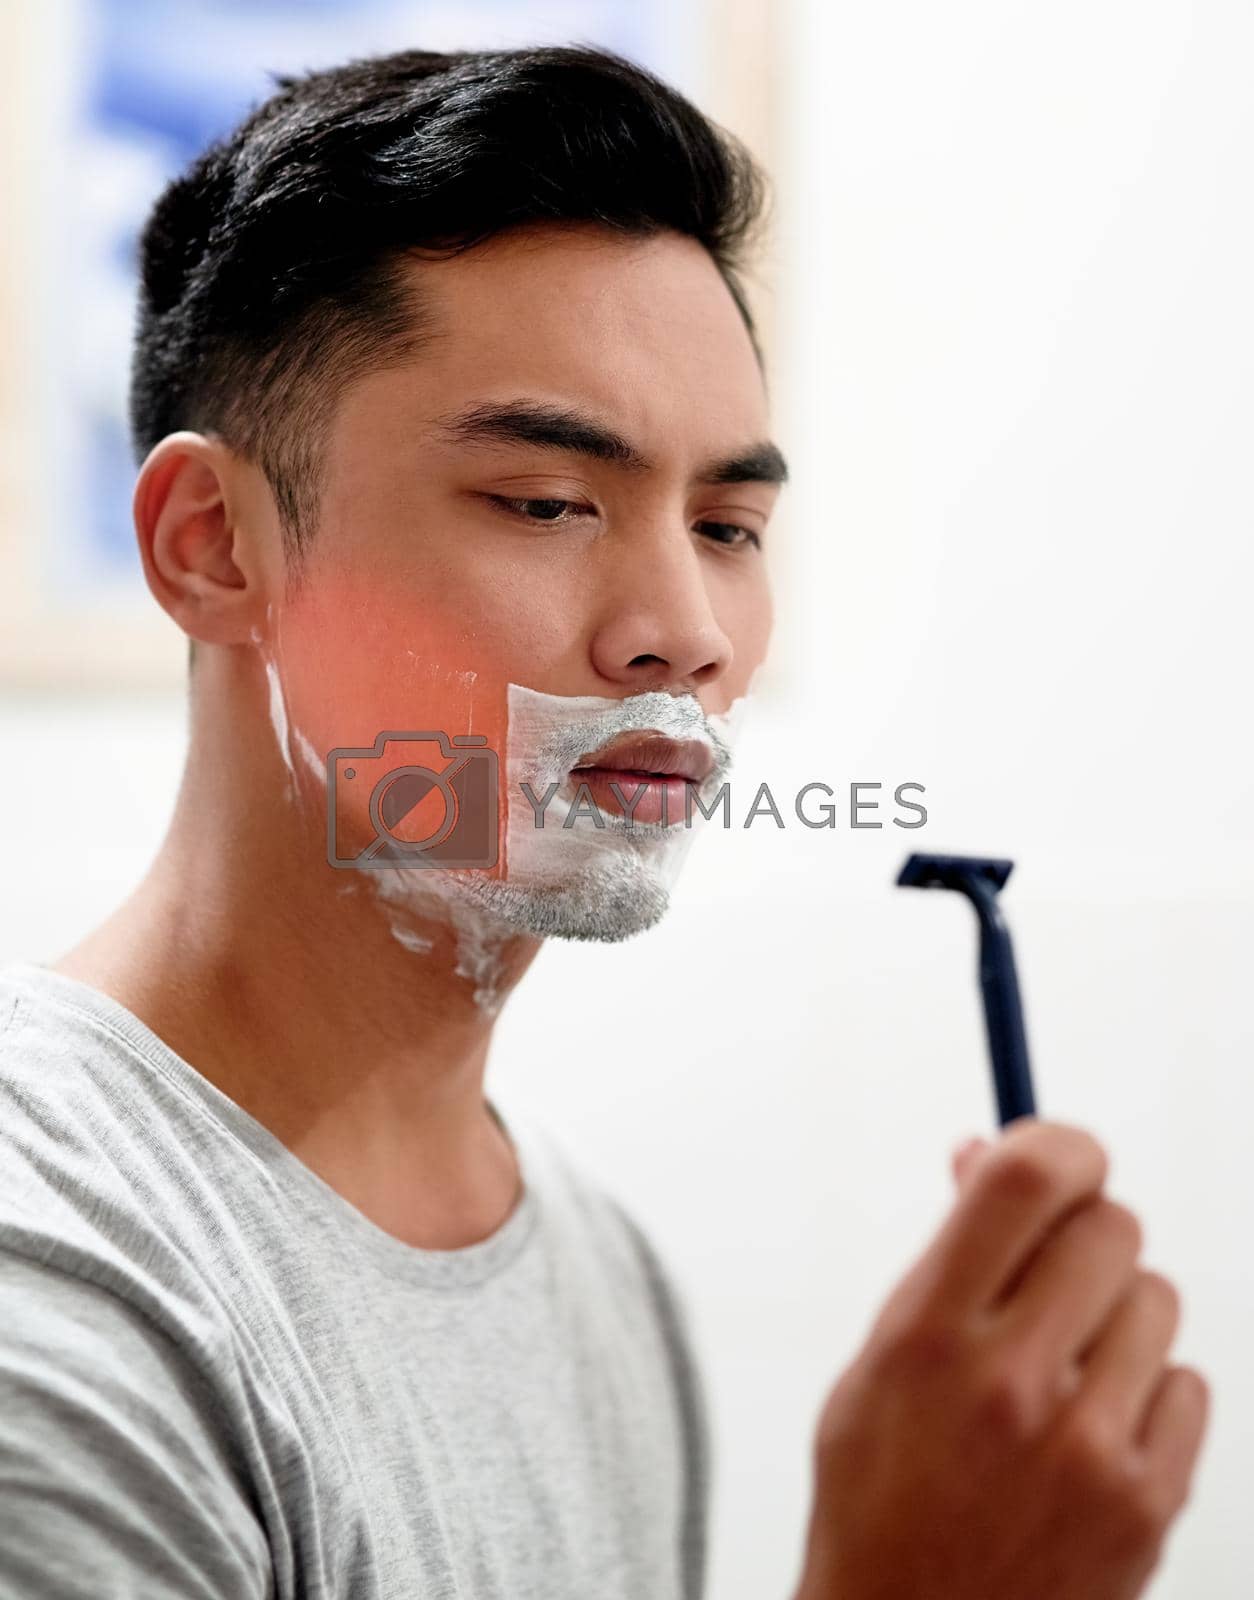 Royalty free image of I really need to replace this. Shot of a young man at home getting razor burn on his face from shaving with a disposable razor. by YuriArcurs